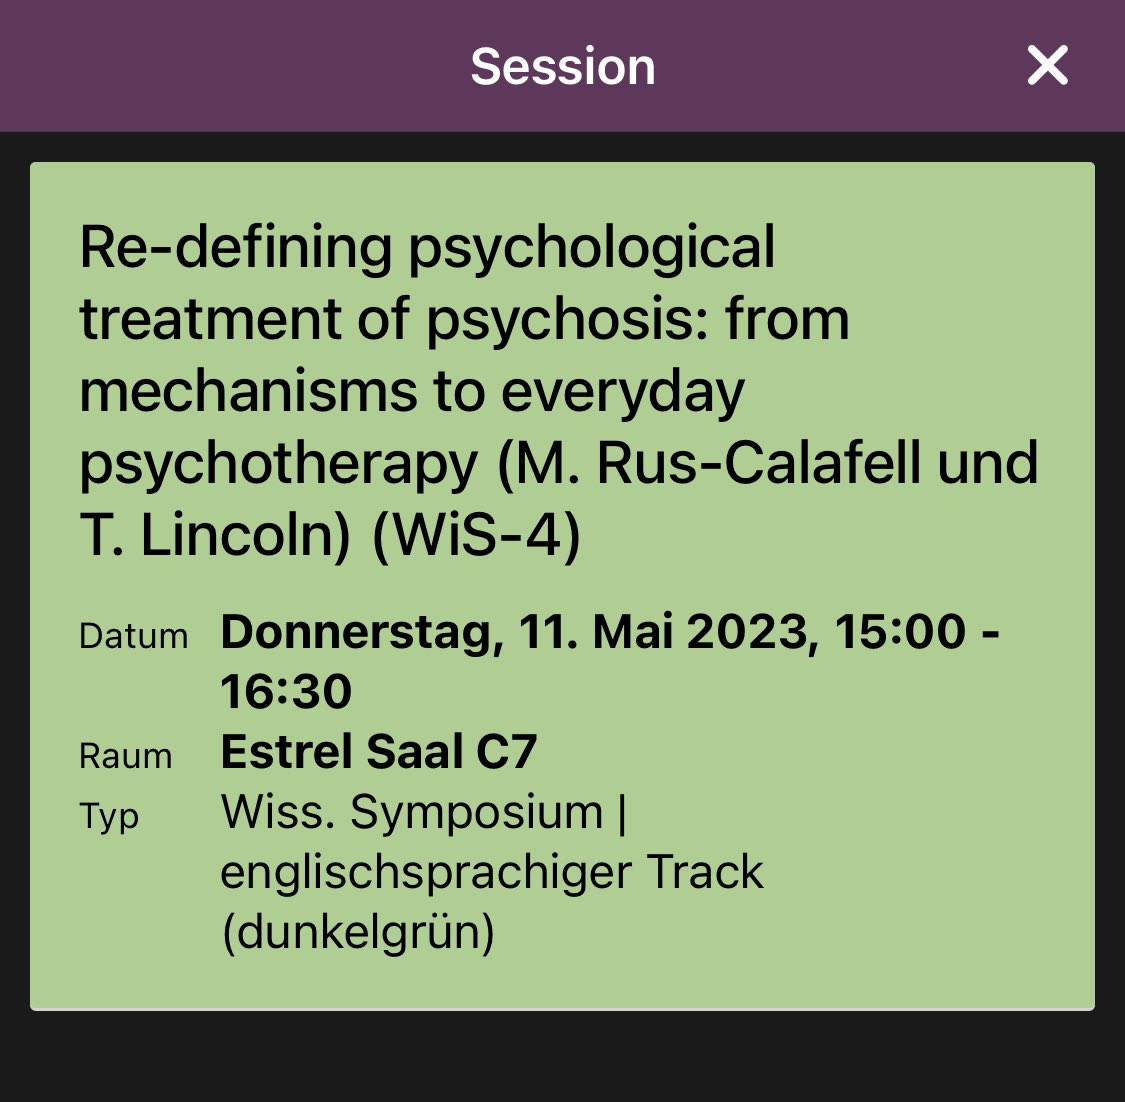 Are you at the @DPK_2023 and interested in mechanisms and new psychotherapies for psychosis? COME TODAY TO OUR SYMPOSIUM ‼️ 👇🏼